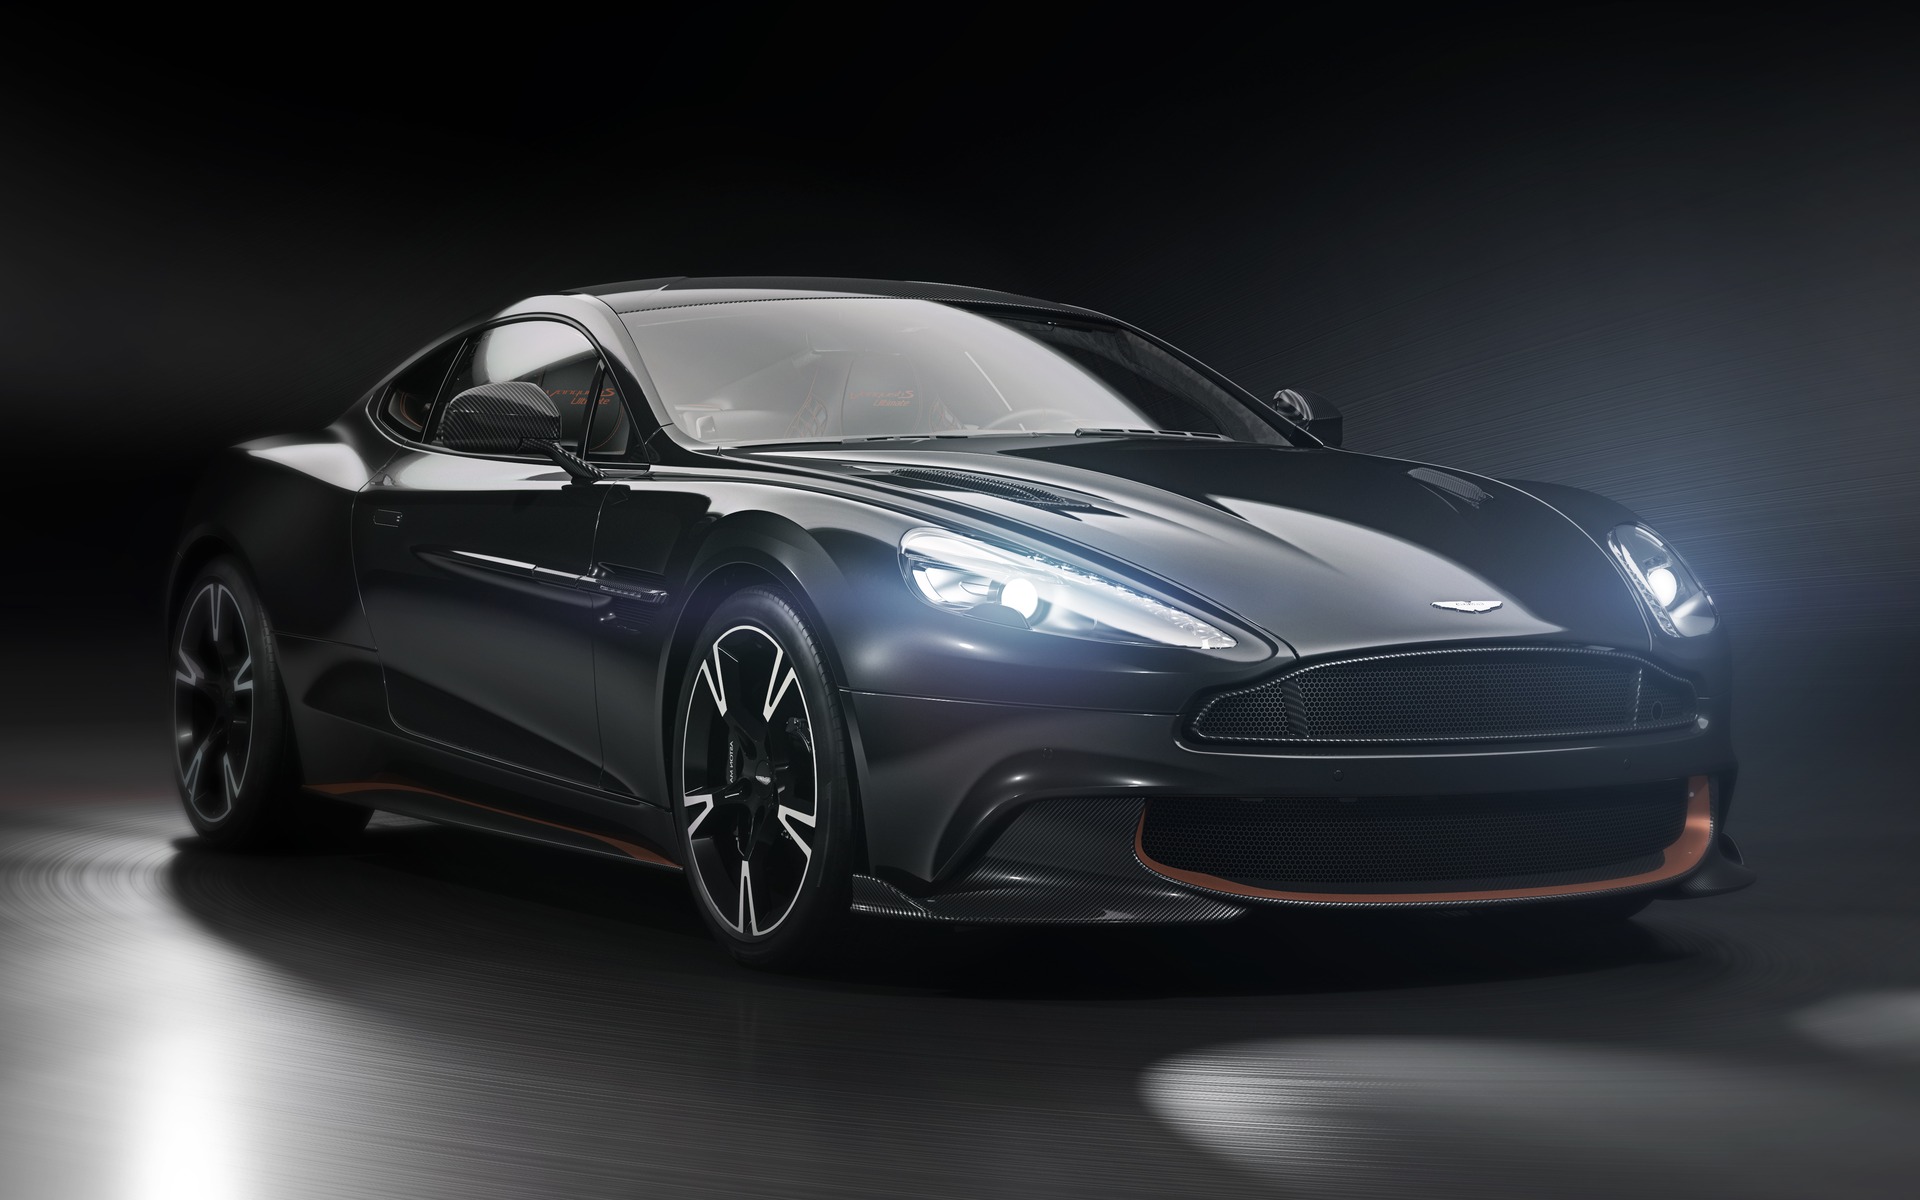 2018 Aston Martin Vanquish S Ultimate: The Final Edition - The Car Guide